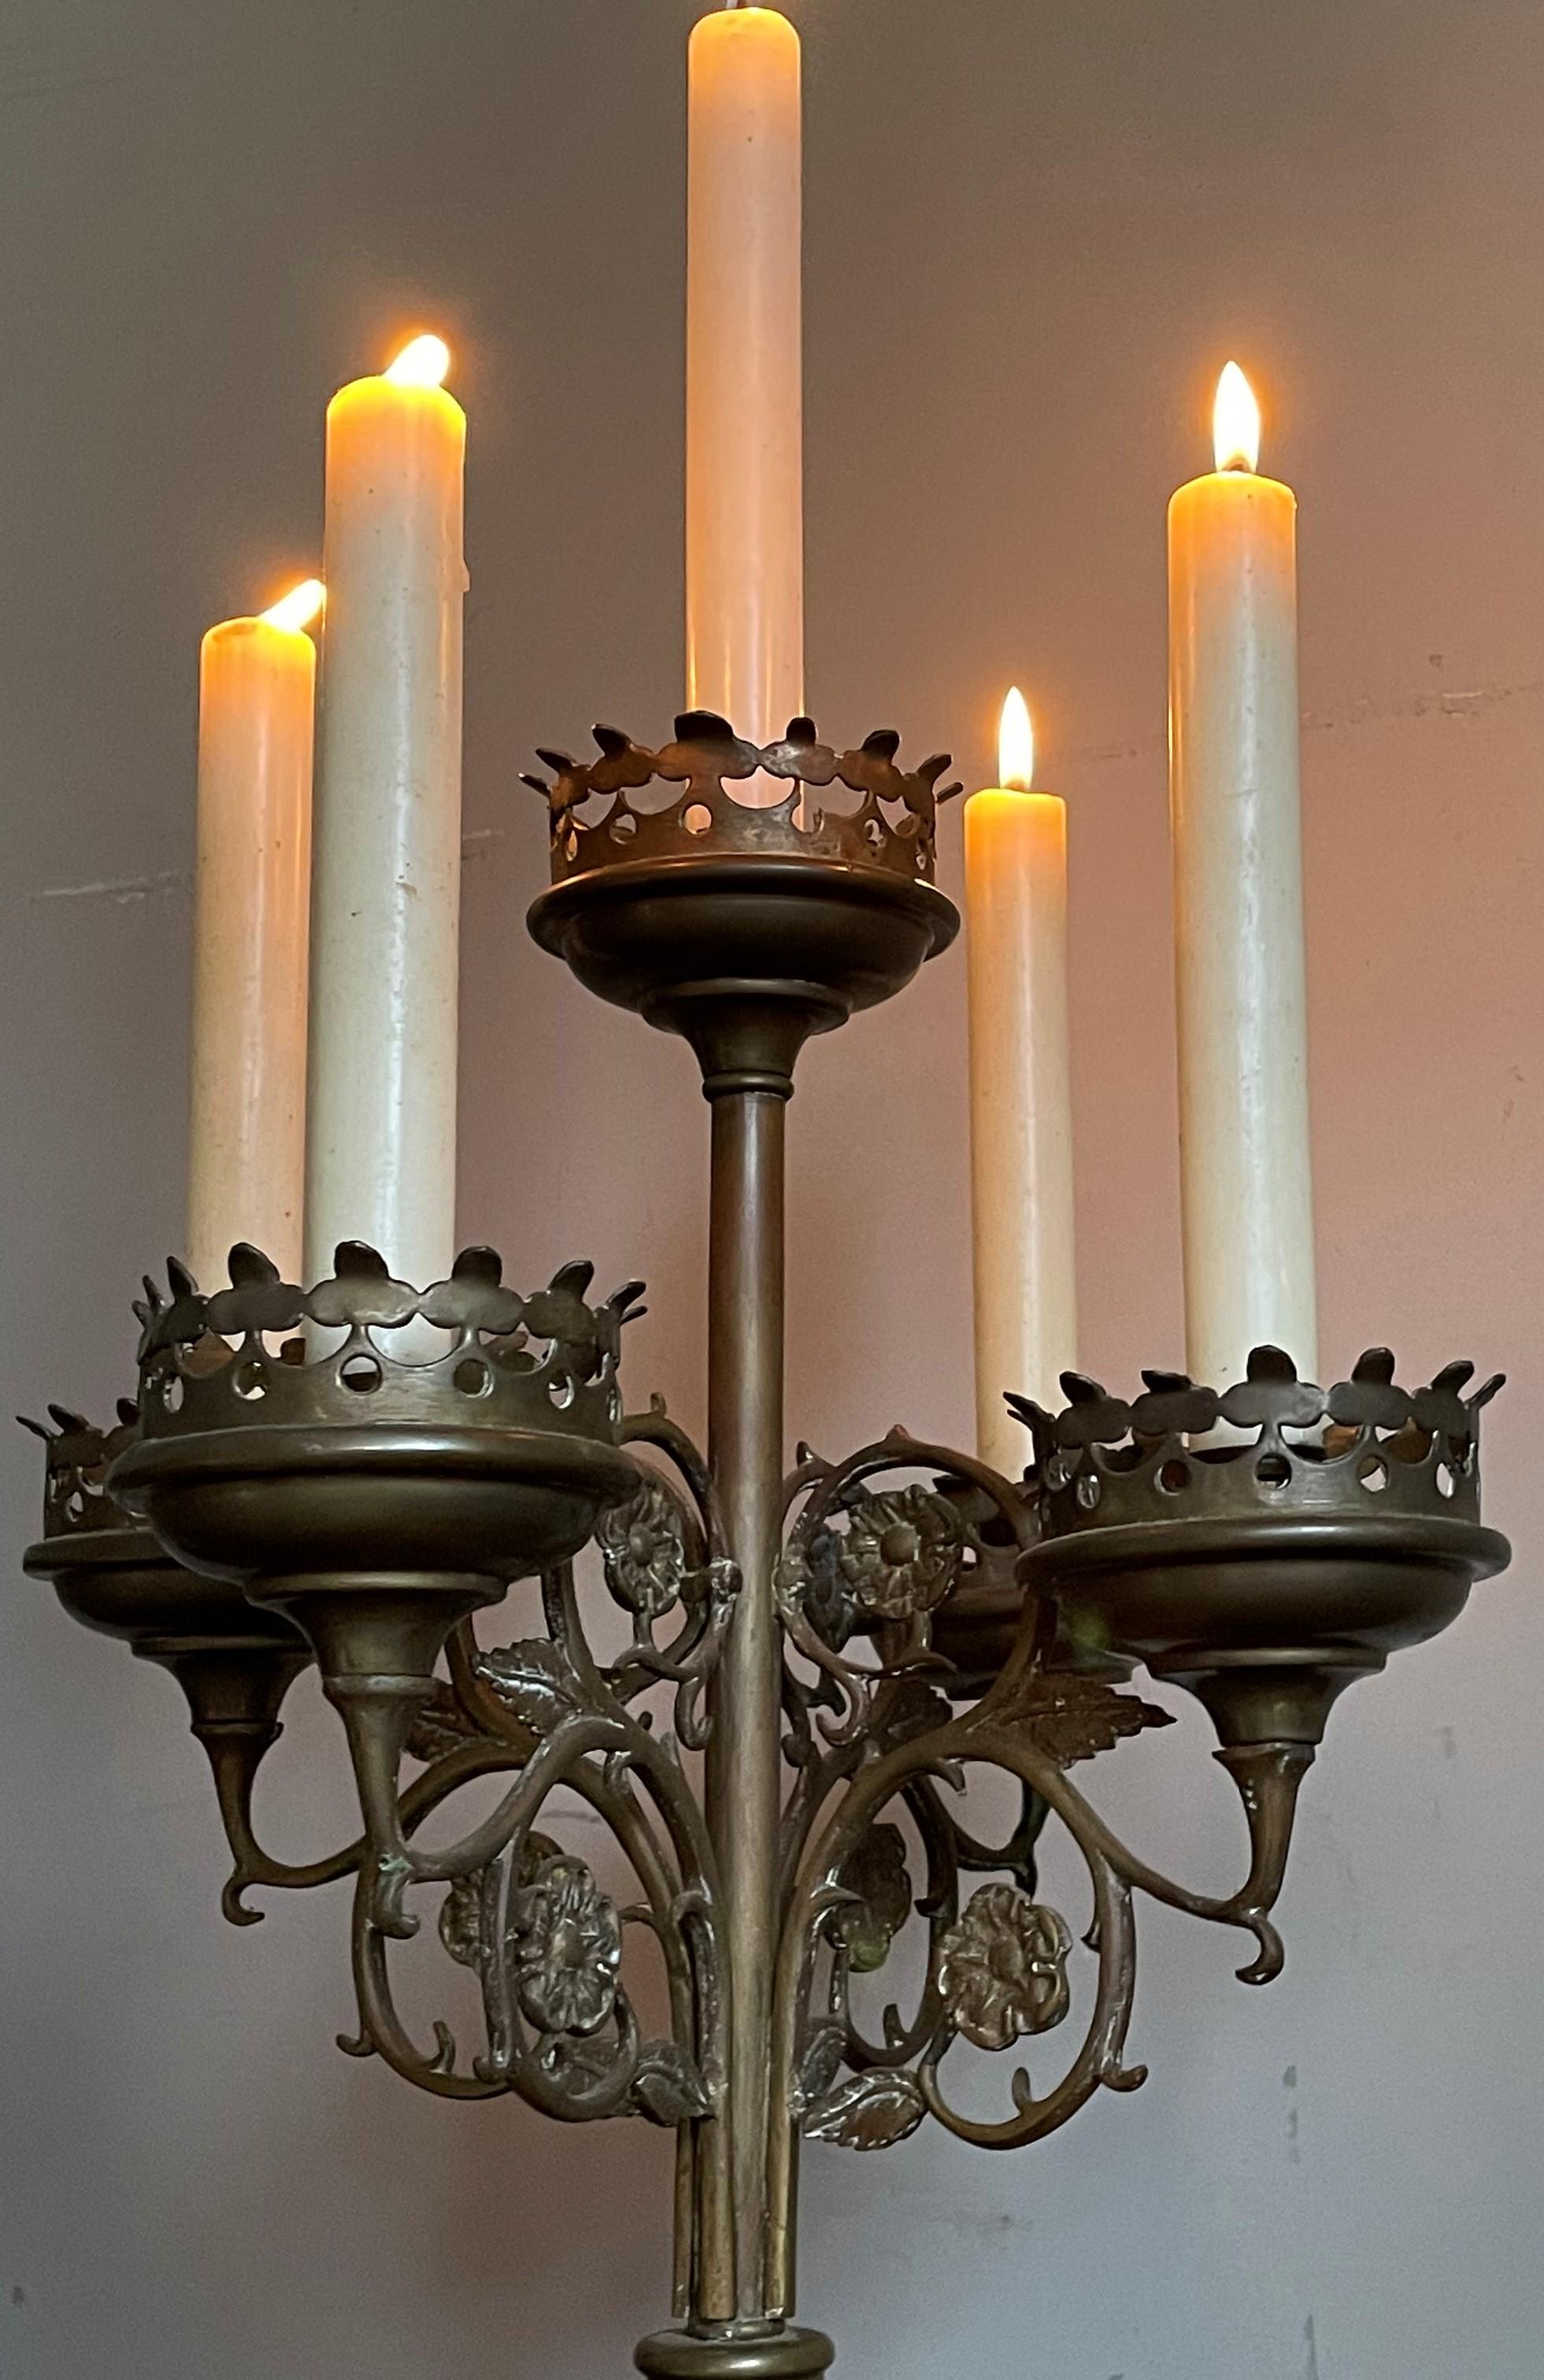 20th Century Antique Gothic Revival Pair of Bronze & Brass Table Candelabras / Candle Stands